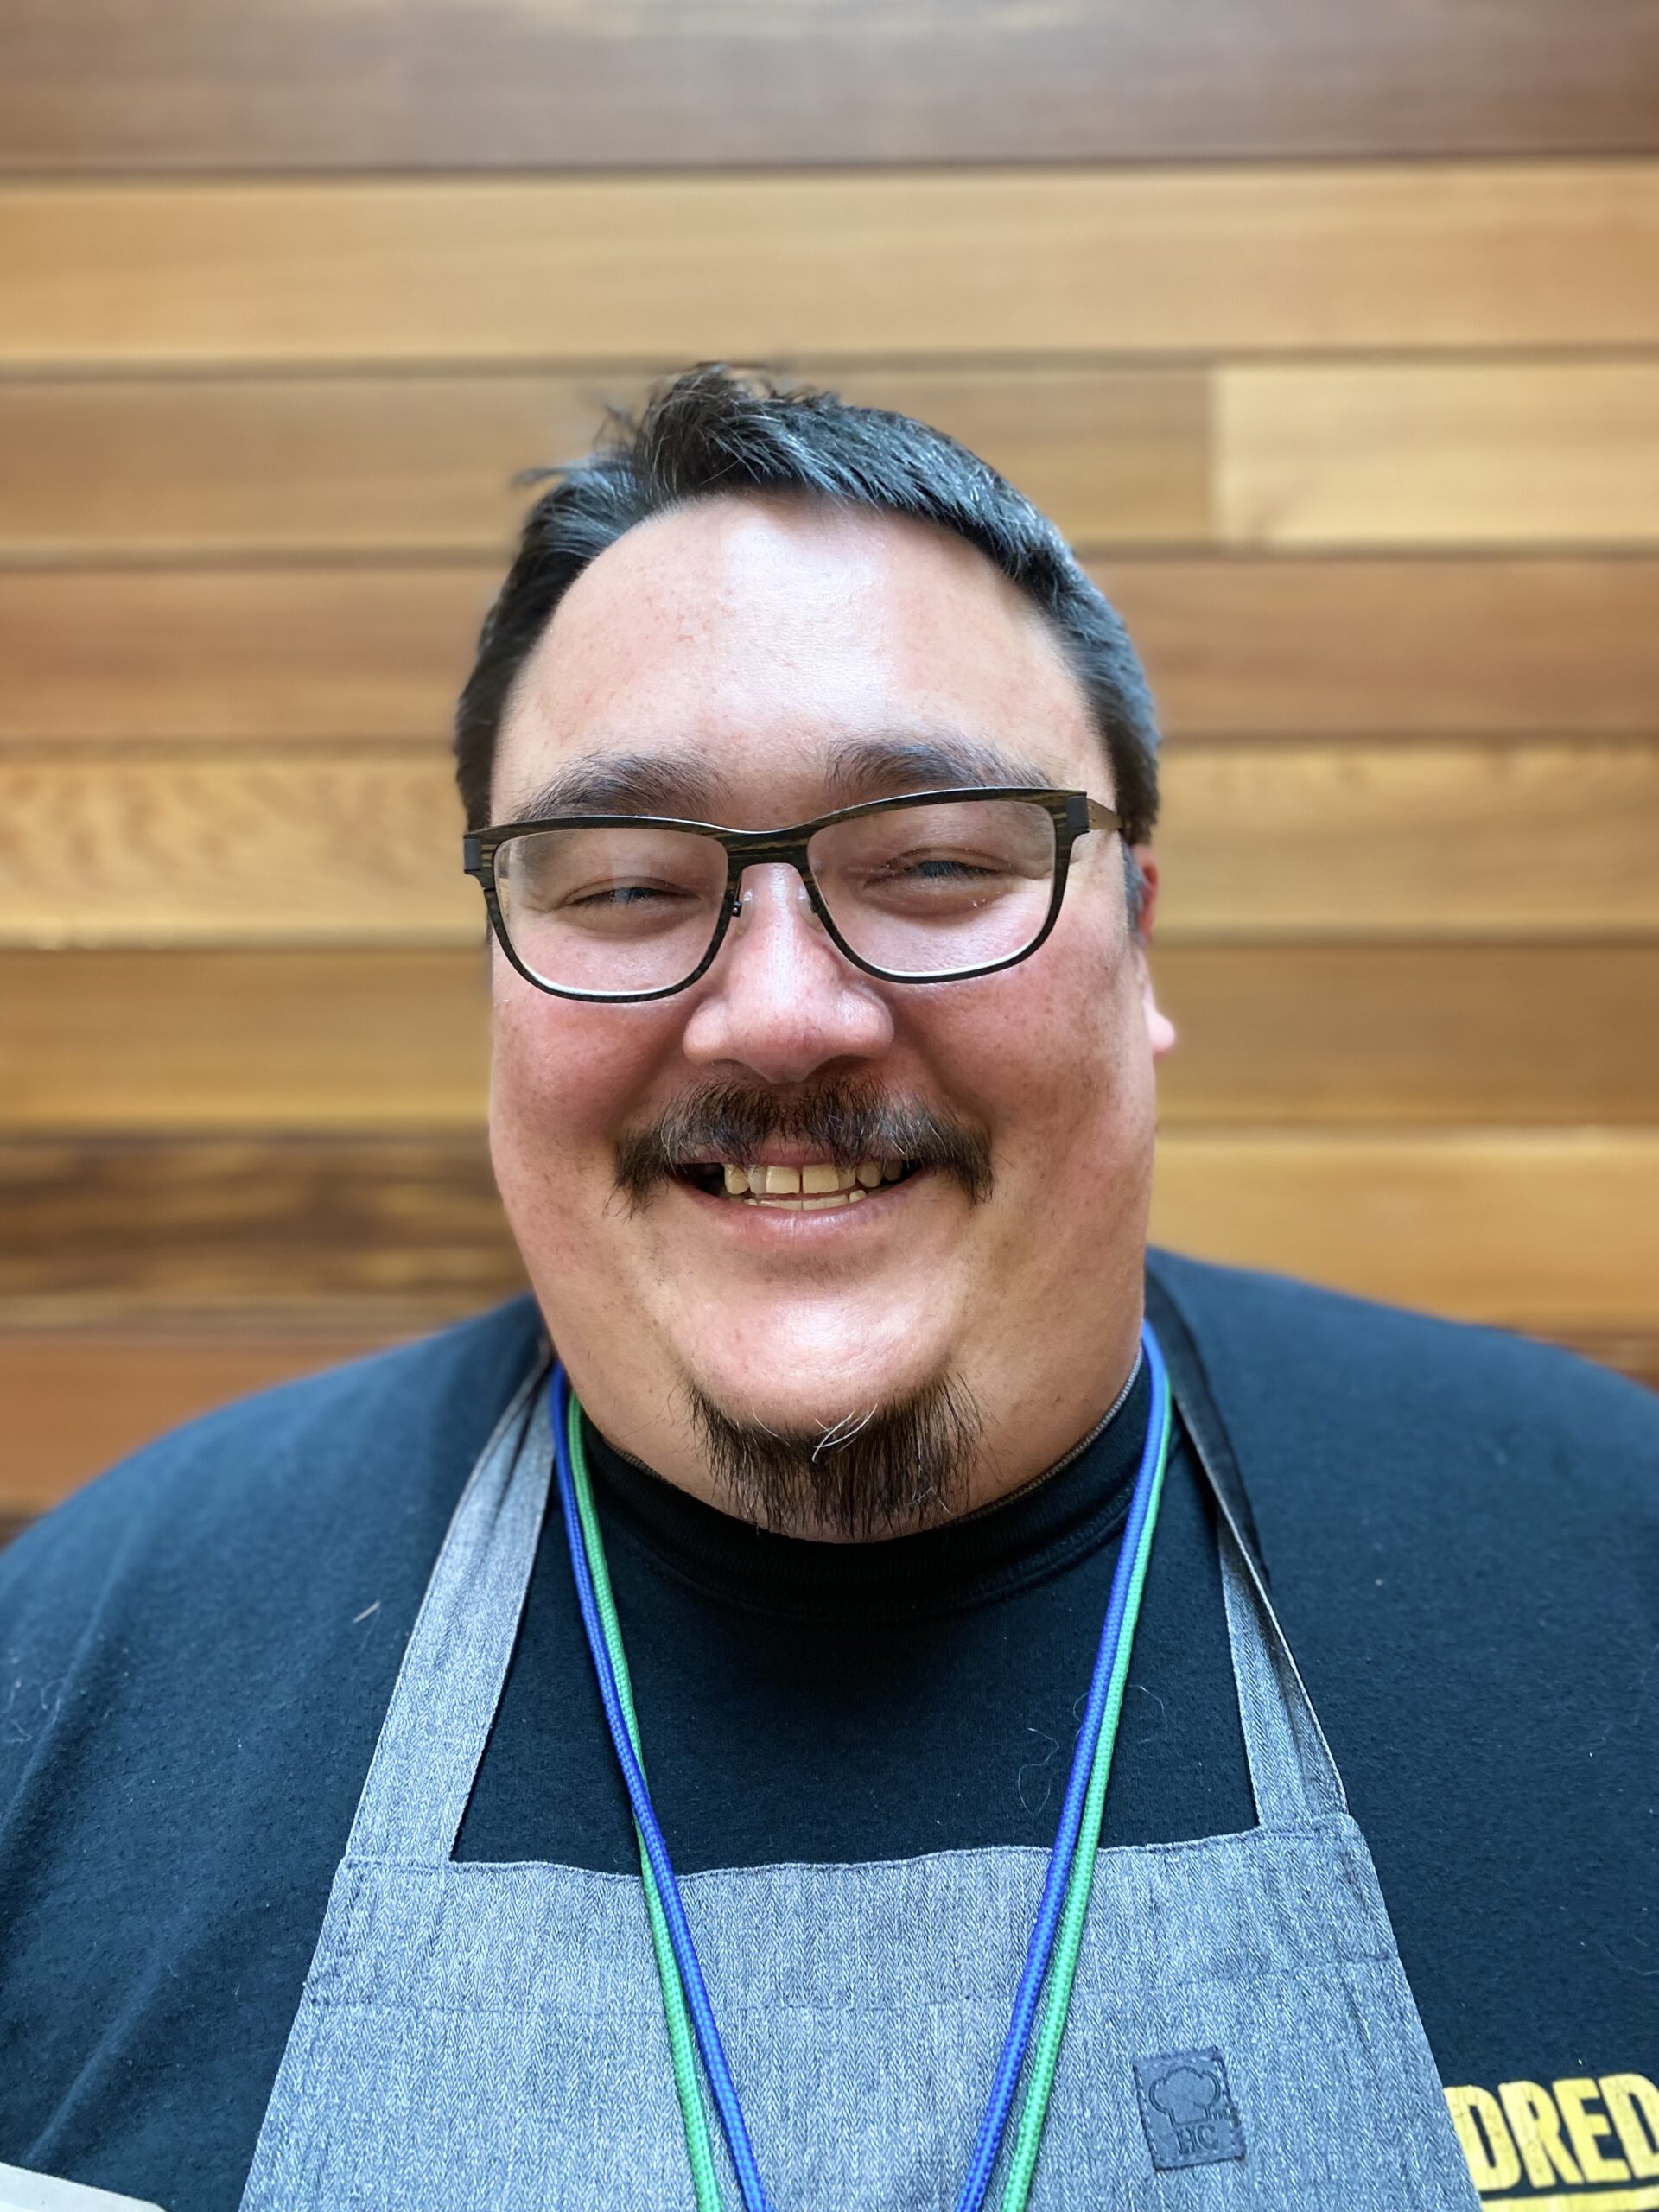 Photo of a man with glasses and apron, smiling at the camera.